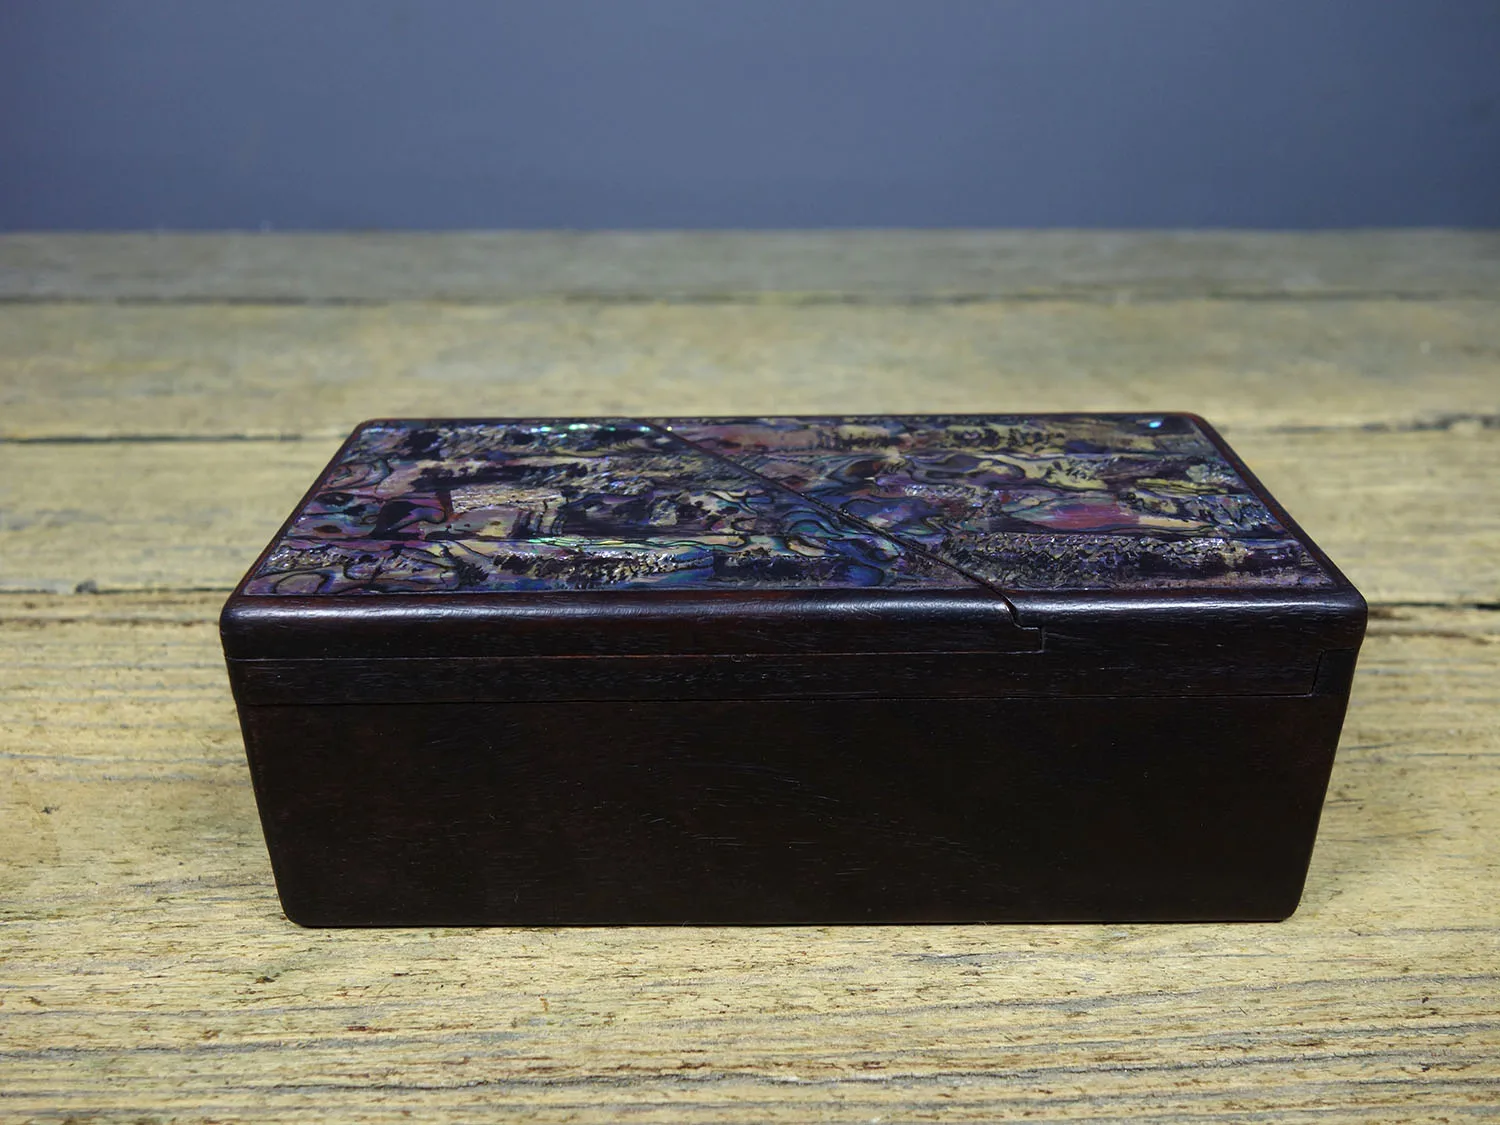 

The exquisitely Crafted old Collection of Rosewood Jewelry Boxes with Exquisite Patterns is Worth Collecting